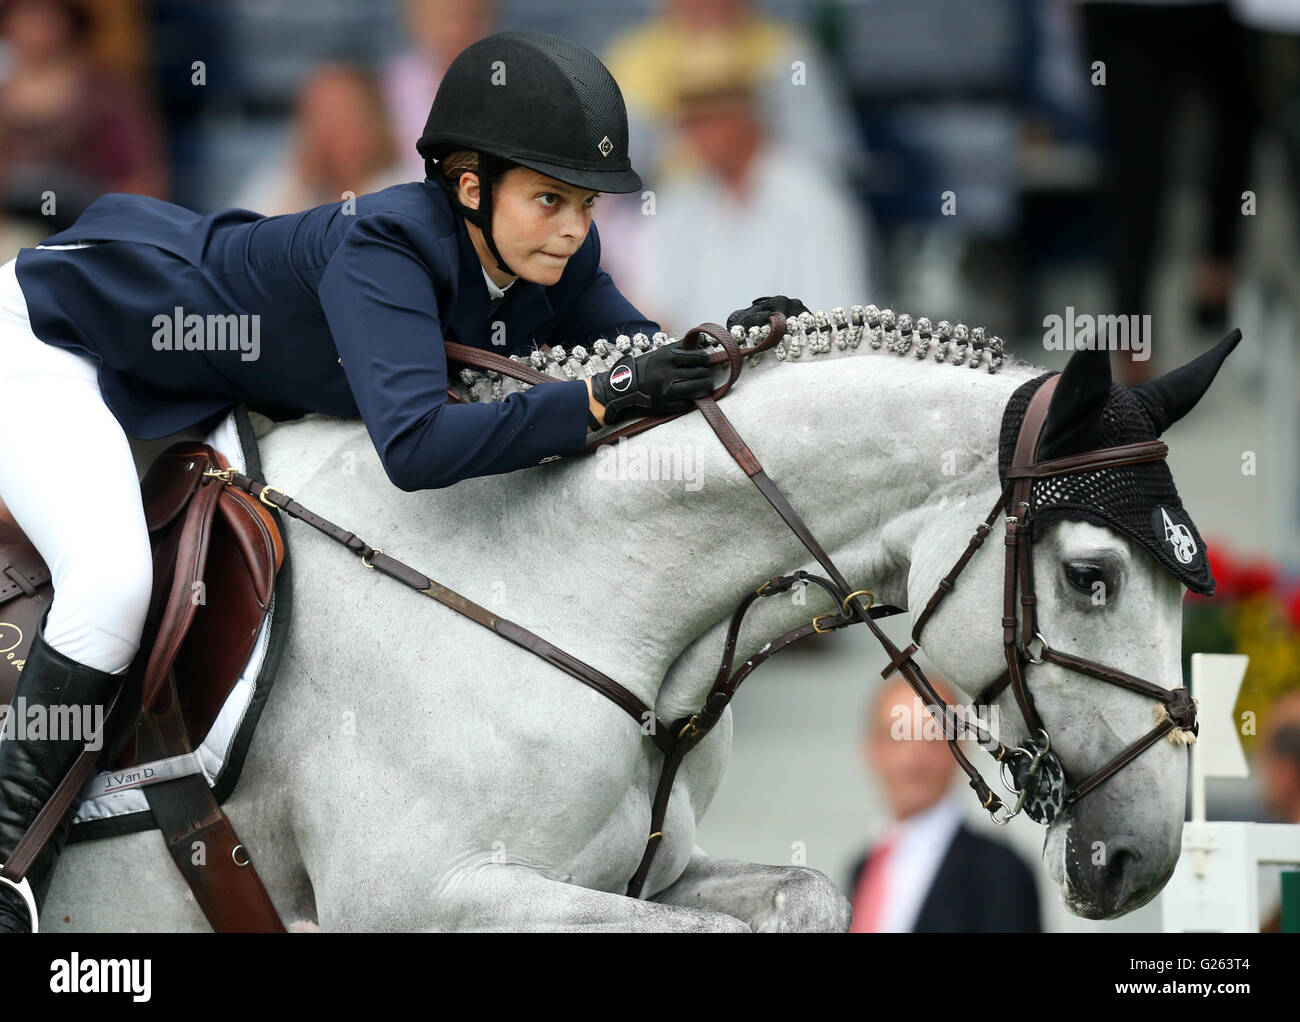 Aachen, Germany. 05th July, 2012. Greek show jumper Athina Onassis de Miranda competes on her horse Uceline at the CHIO in Aachen, Germany, 05 July 2012. Photo: ROLF VENNENBERND | usage worldwide/dpa/Alamy Live News Stock Photo